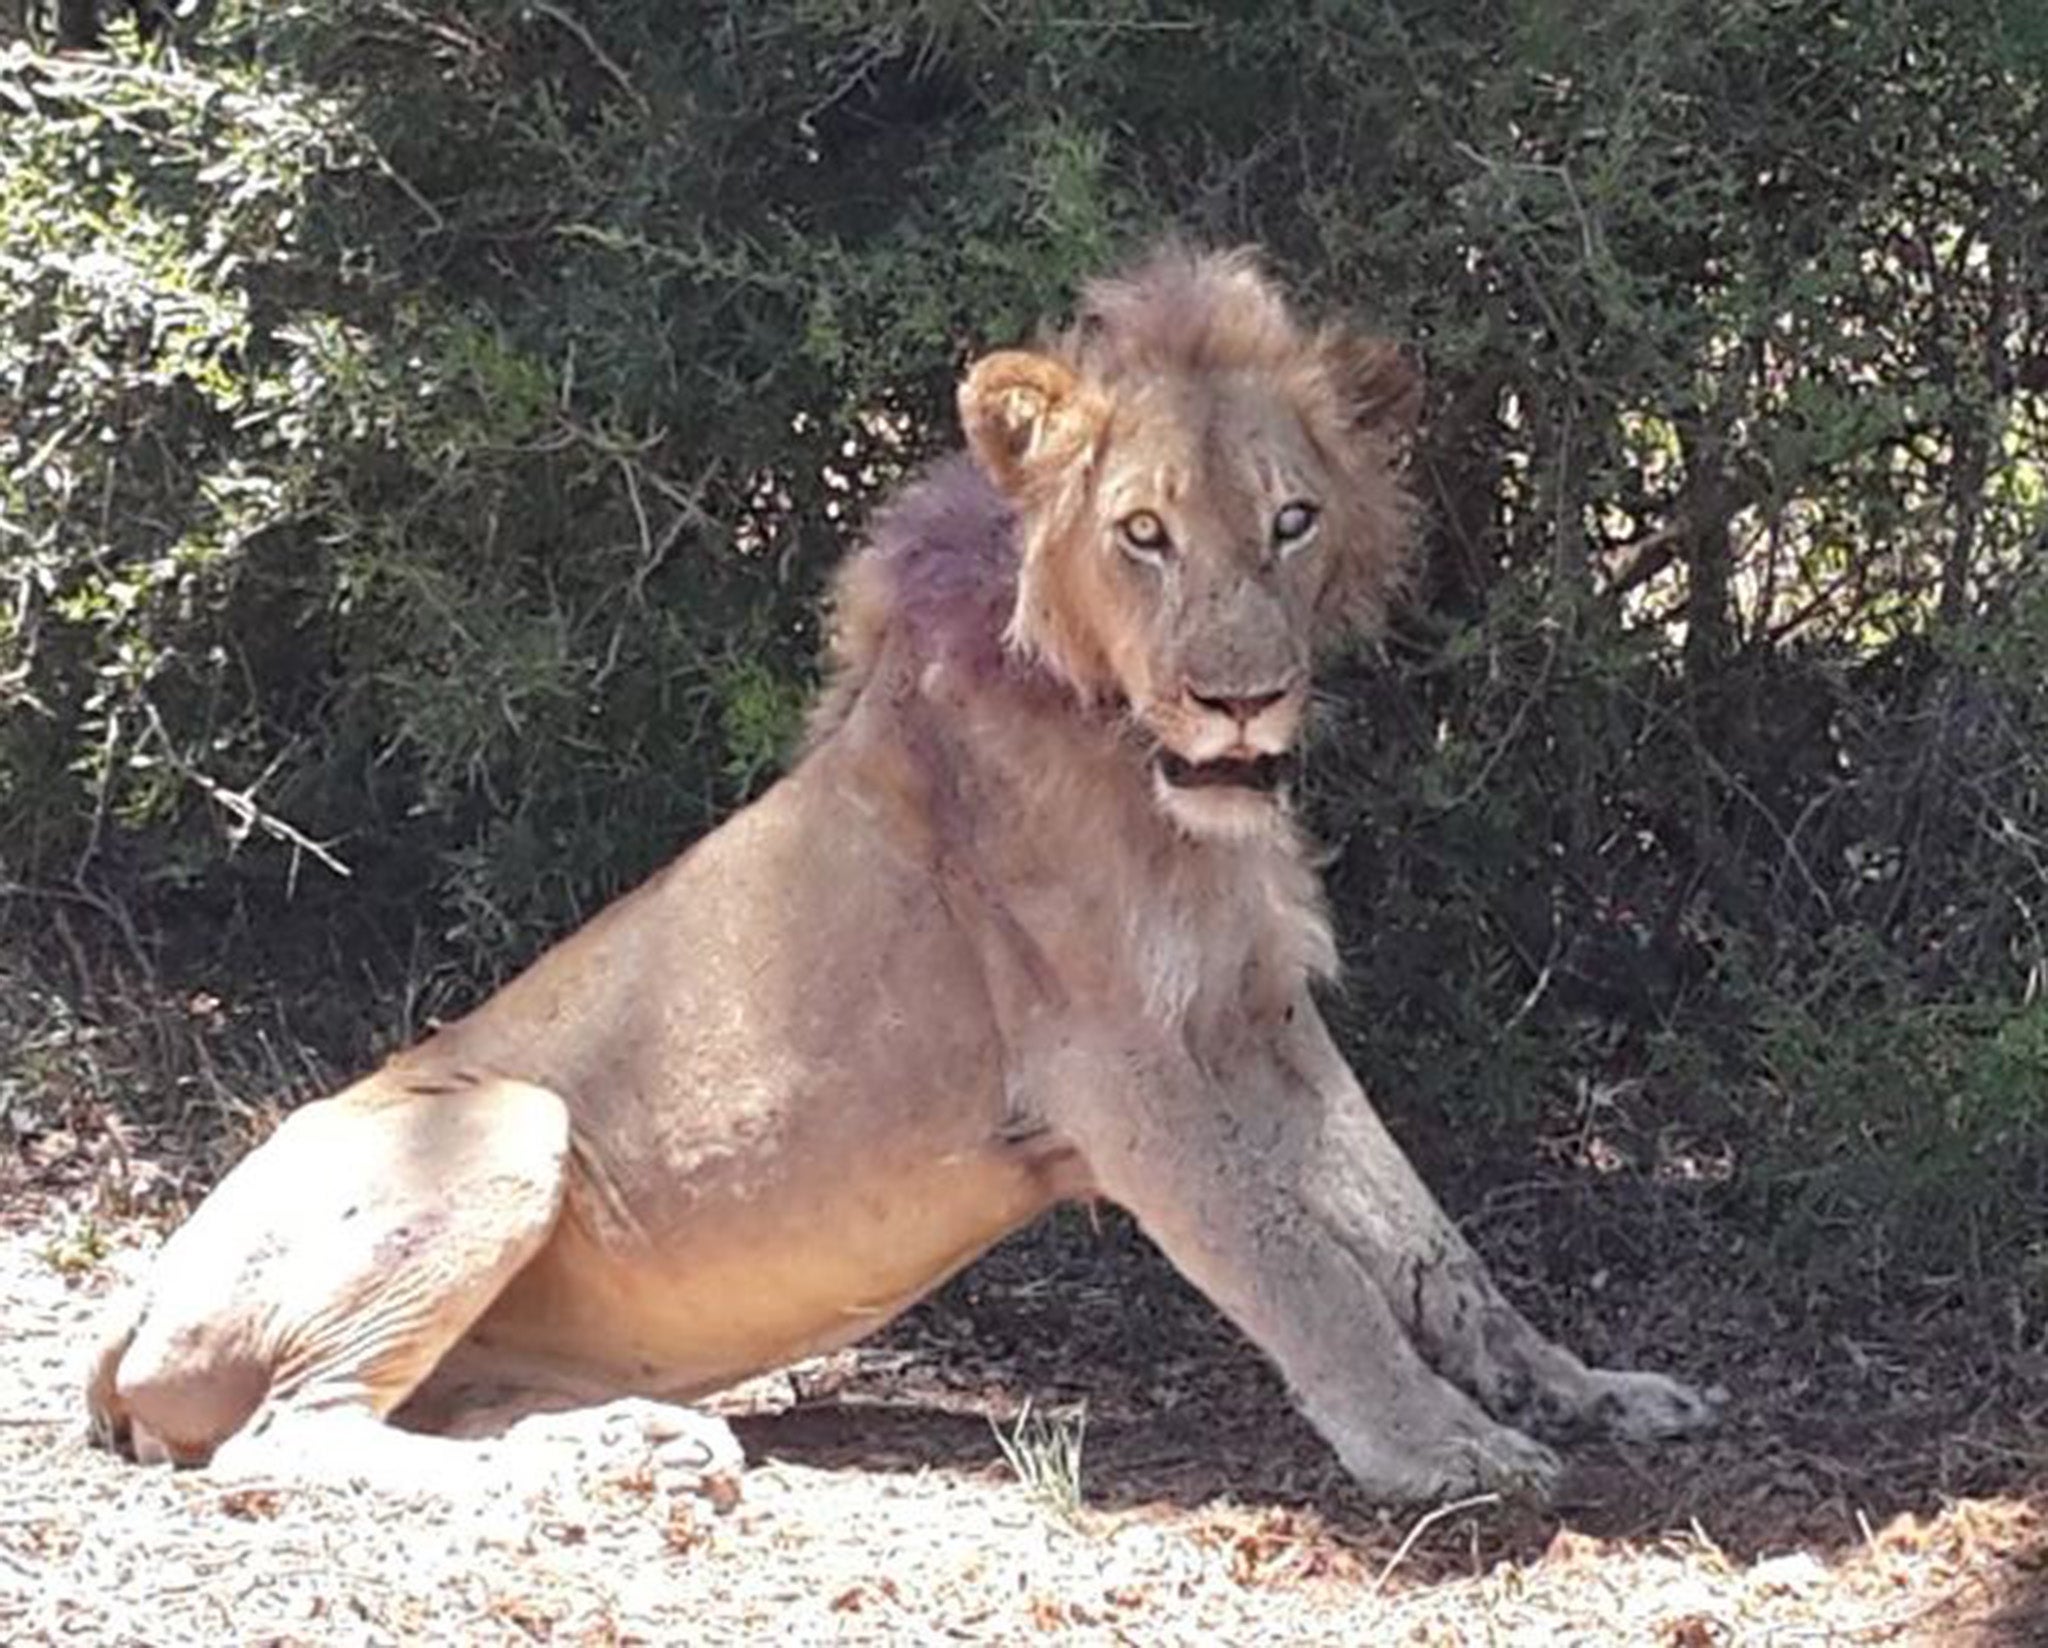 The lion is said to be recovering well after its ordeal